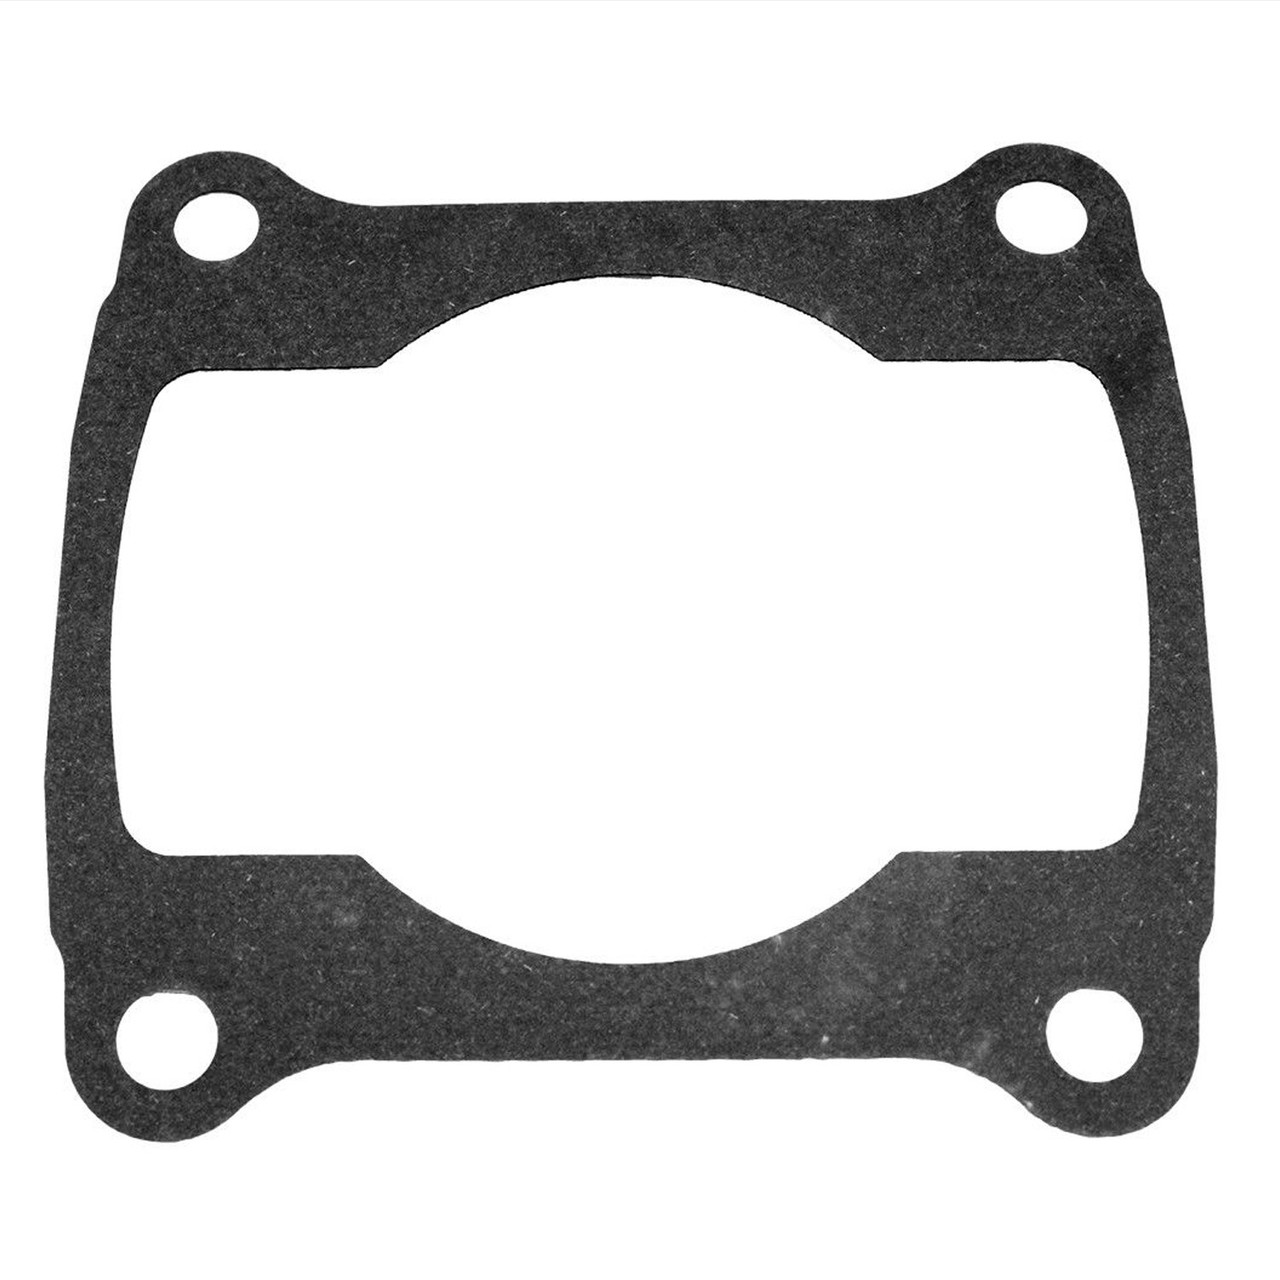 Polaris New OEM Snowmobile Cylinder Base Gasket Indy,Classic,Deluxe,Touring,Edge